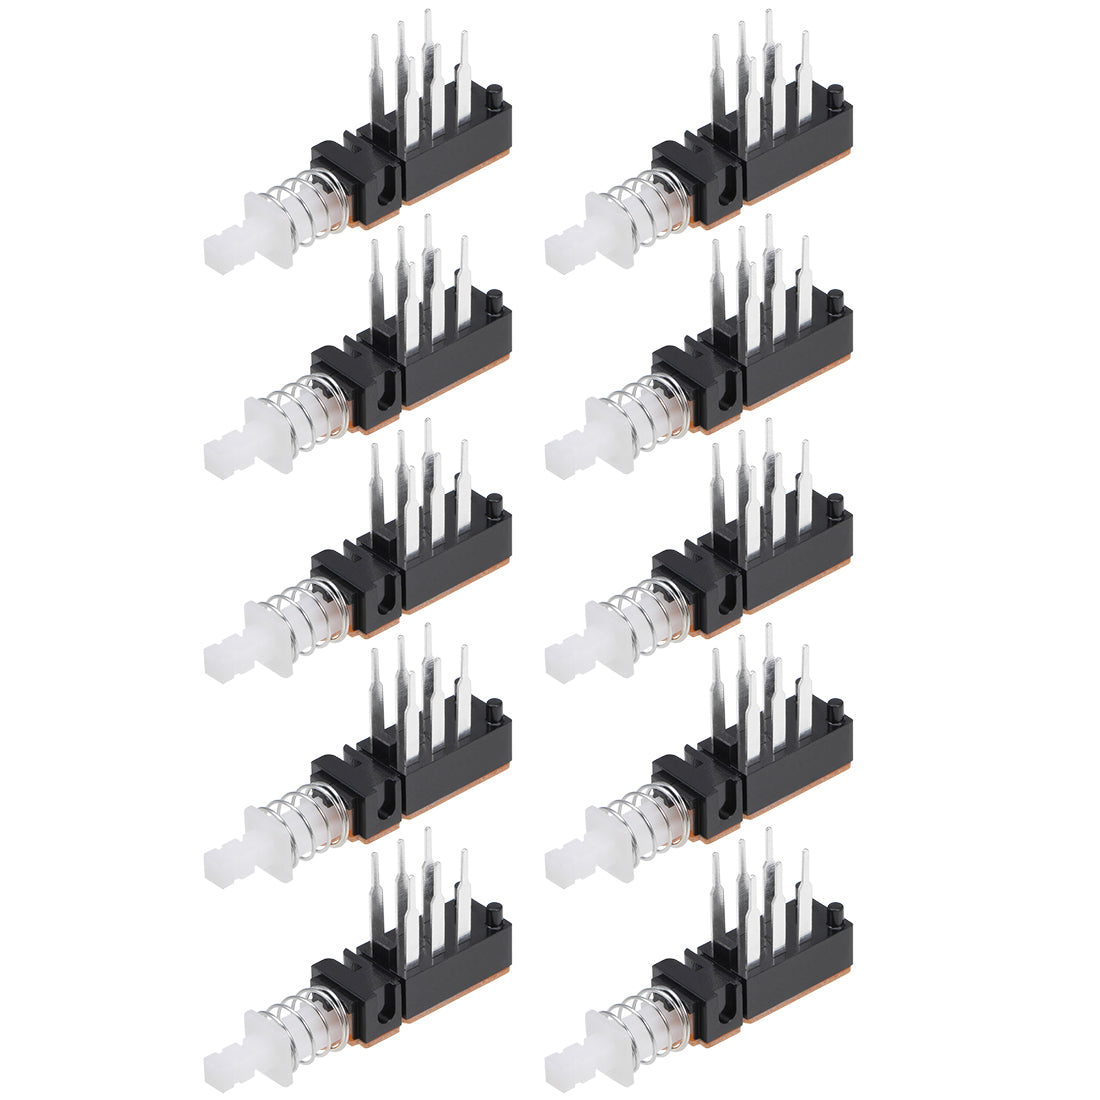 uxcell Uxcell Push Button Switch DPDT 6 Pin 1 Position Self-Locking 10pcs